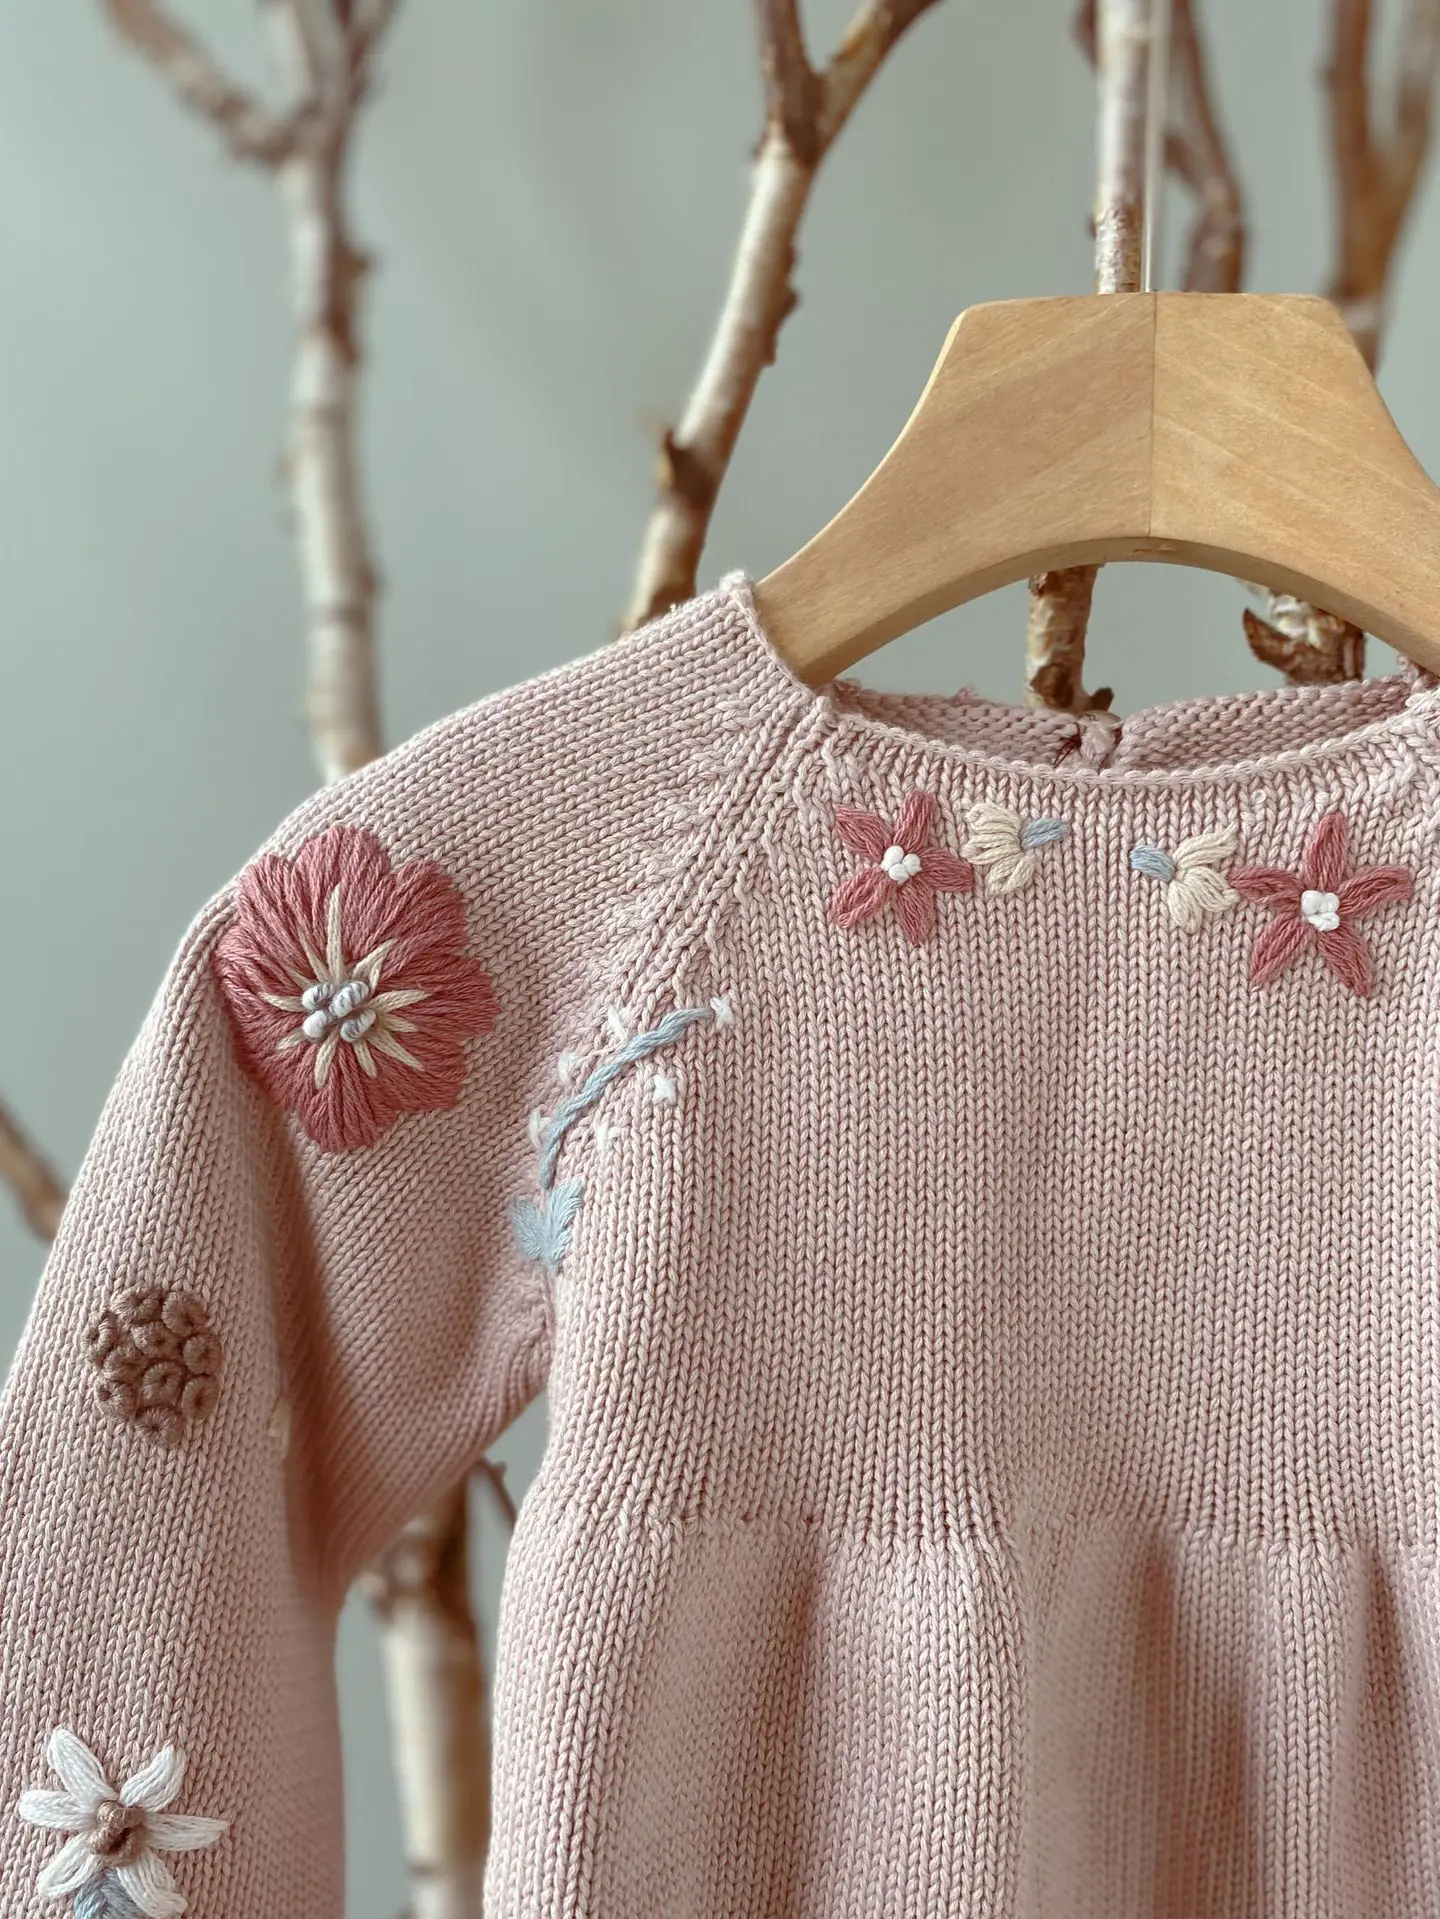 Baby Bodysuits cheap Baby Clothes Girl Romper Shirley Bredal Brand New Autumn Cardigan Embroidery Cotton Soft Sweater Newborn One Piece Jumpsuit Warm Baby Bodysuits 